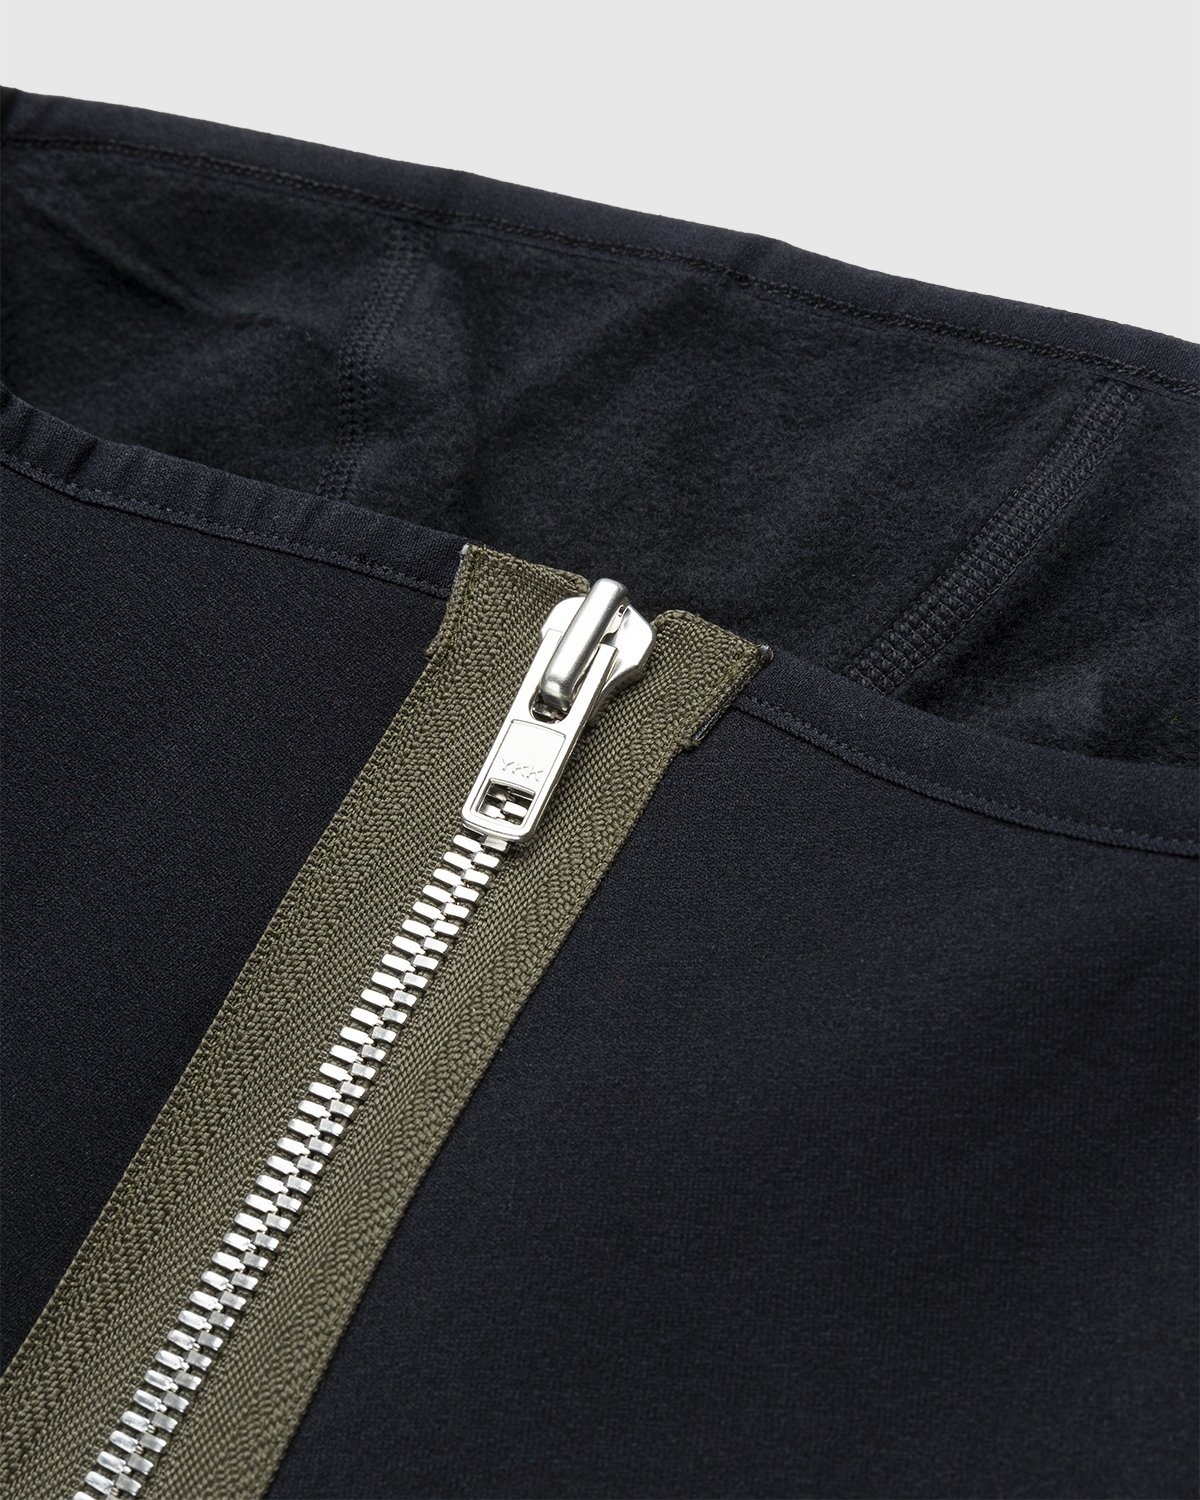 ACRONYM – NG4-PS Neckgaitor Olive Silver - Knits - Green - Image 3